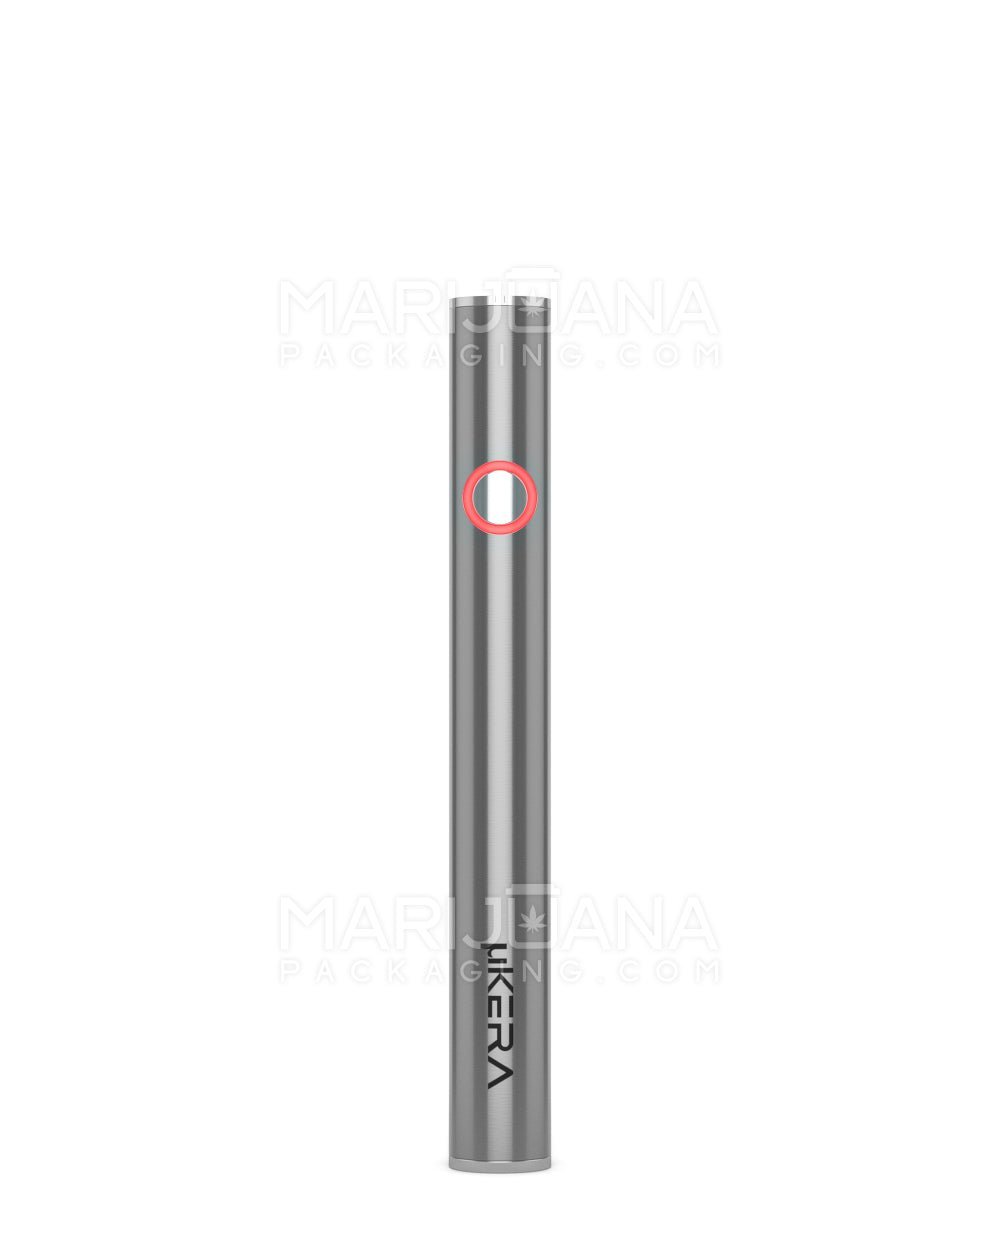 Variable Voltage Vape Battery | 320mAh - Silver - 80 Count - 1